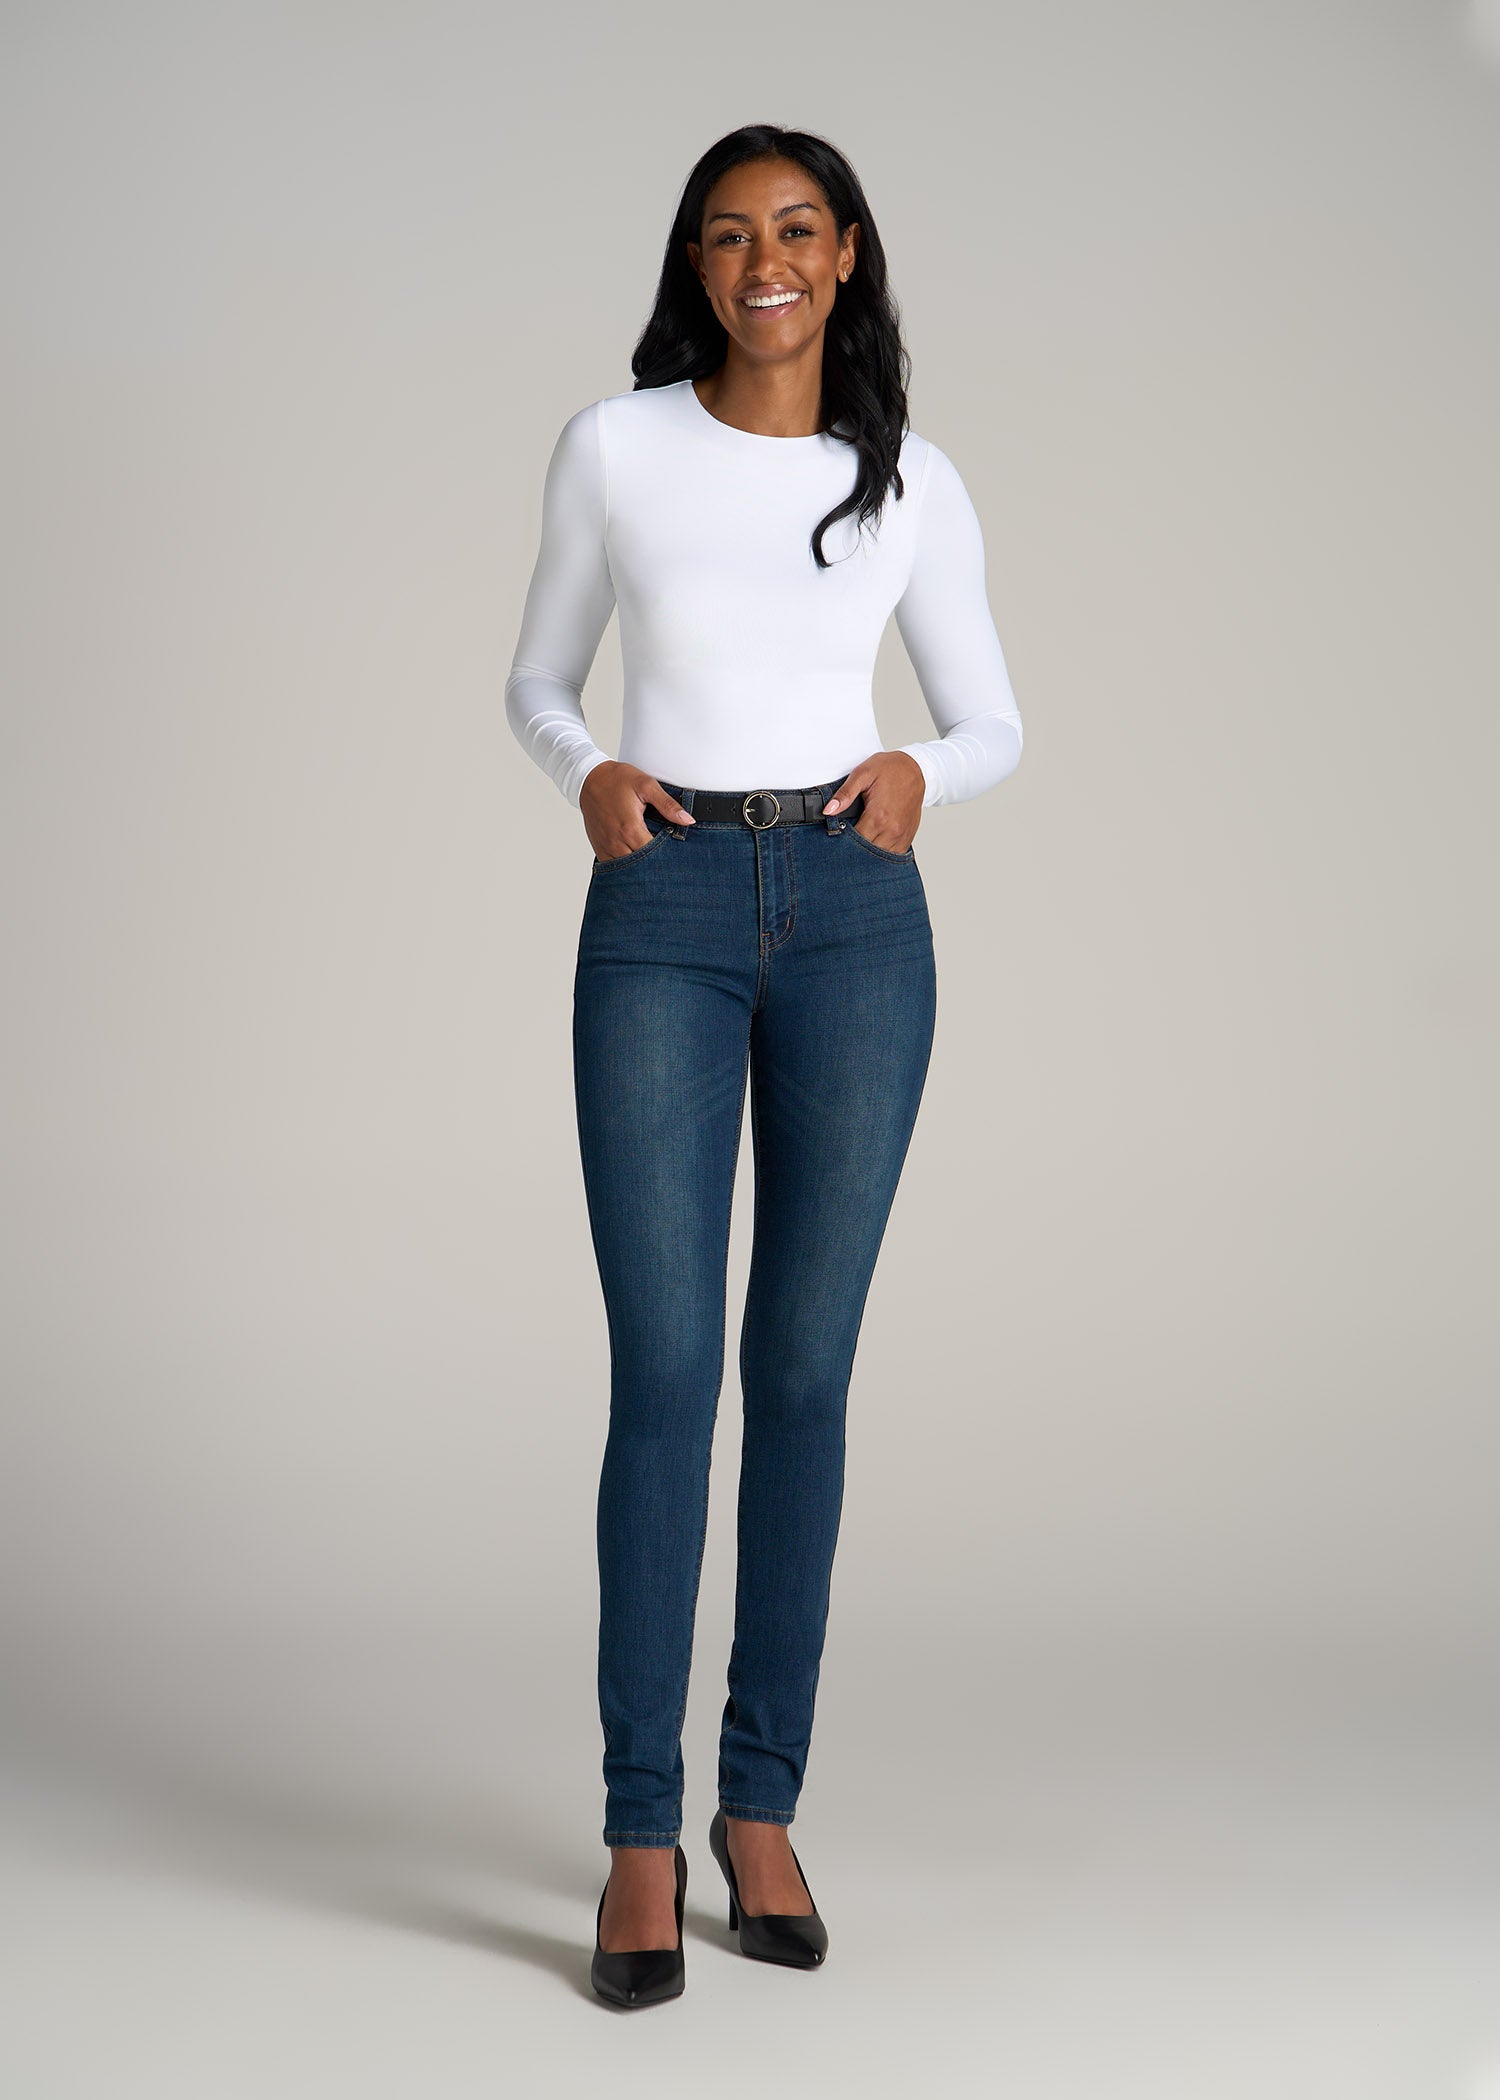 Jeans for Tall Women, Tall Girl Friendly